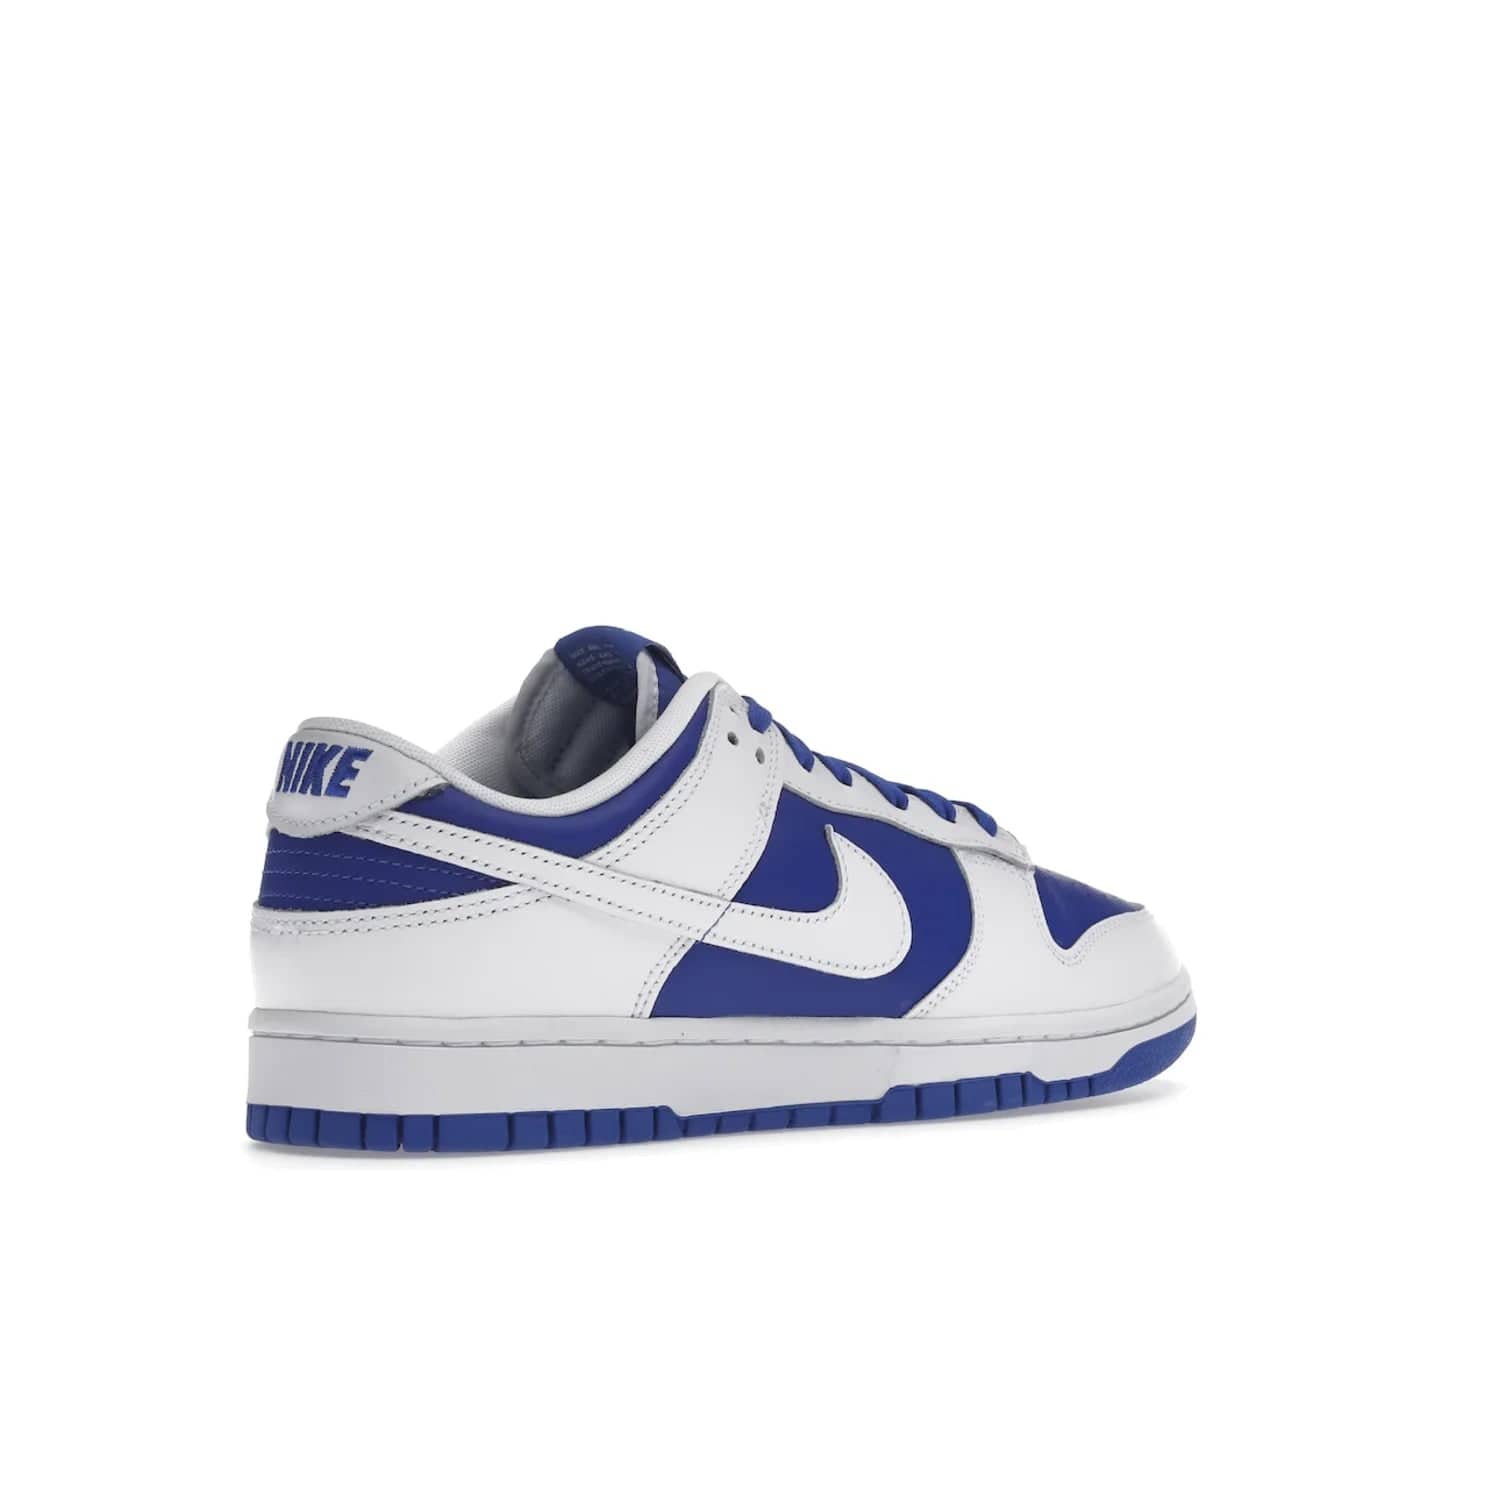 Nike Dunk Low Racer Blue White - Image 33 - Only at www.BallersClubKickz.com - Sleek Racer Blue leather upper and white leather overlays make up the Nike Dunk Low Racer Blue White. Woven tag and heel embroidery for a 1985 Dunk look with a matching EVA foam sole completes the classic colorway.